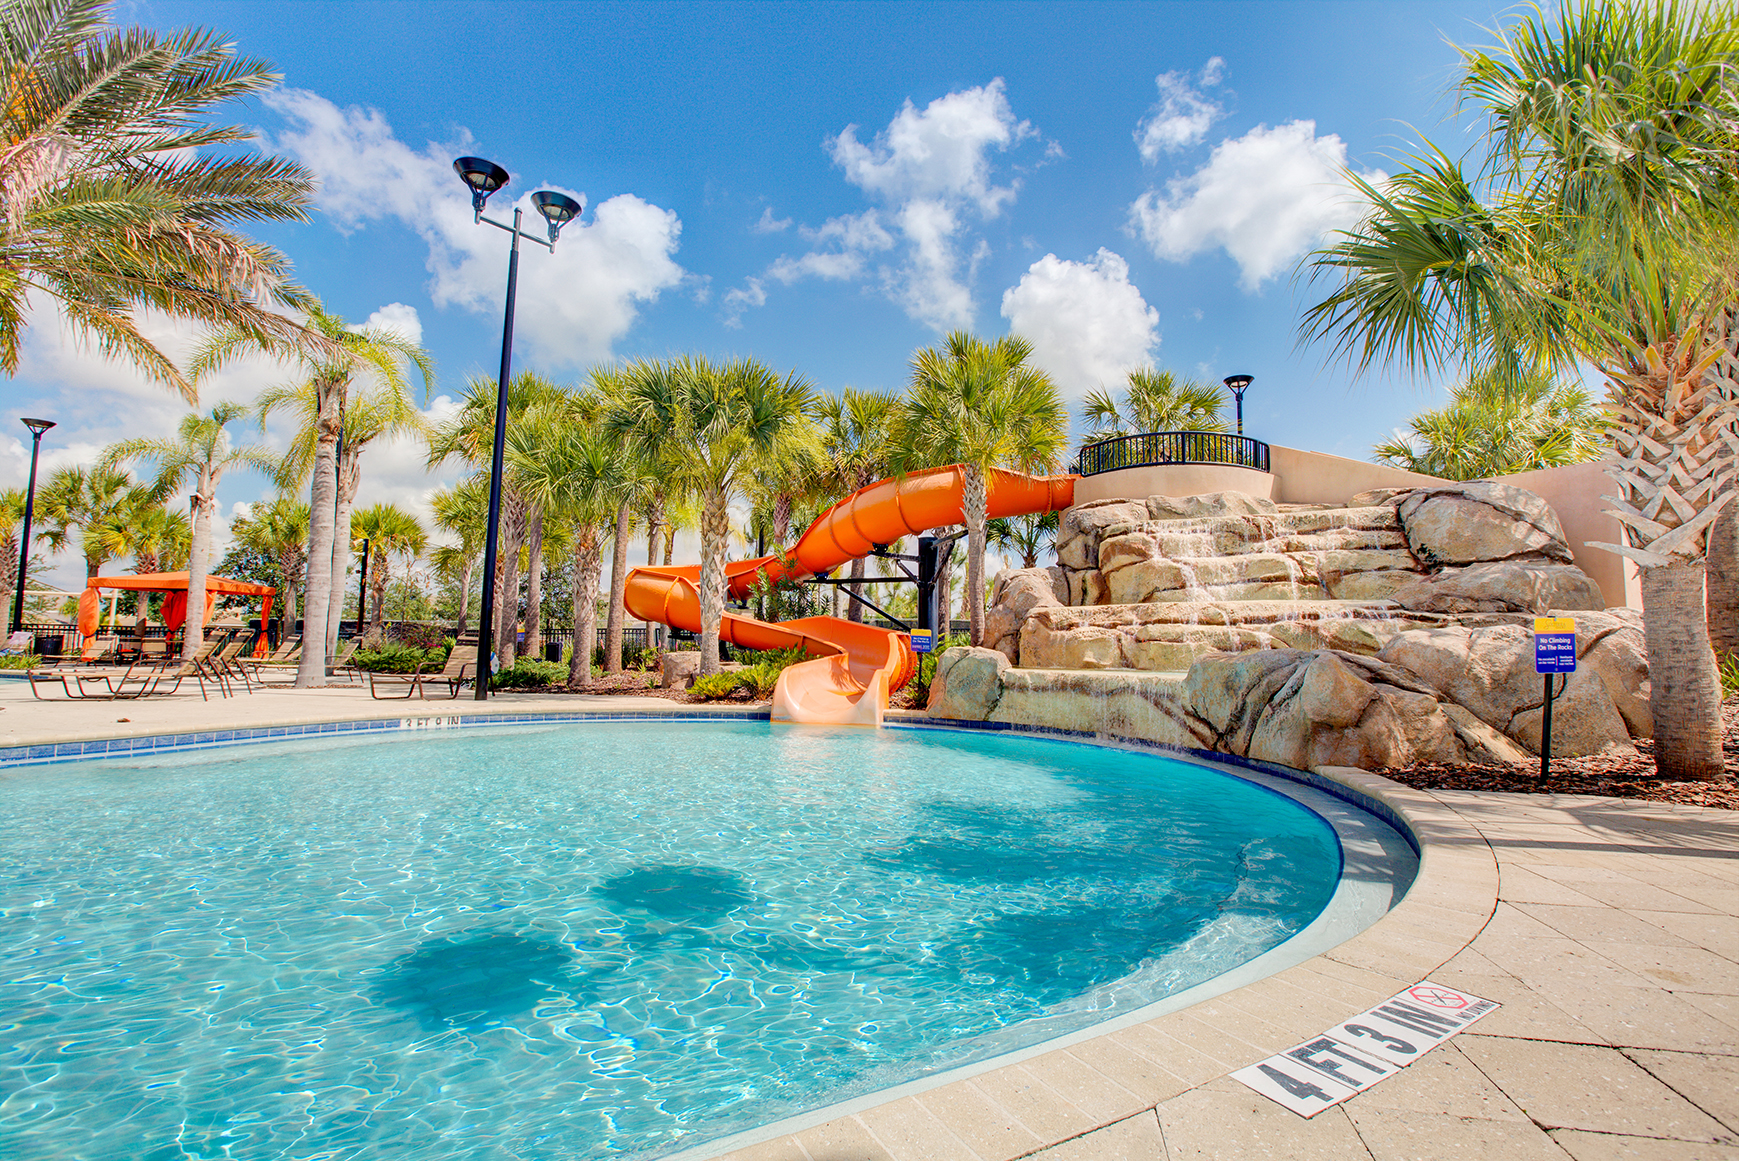 Resort pool - free access to the exciting part of the resort. Swim and slide and even sun bathe